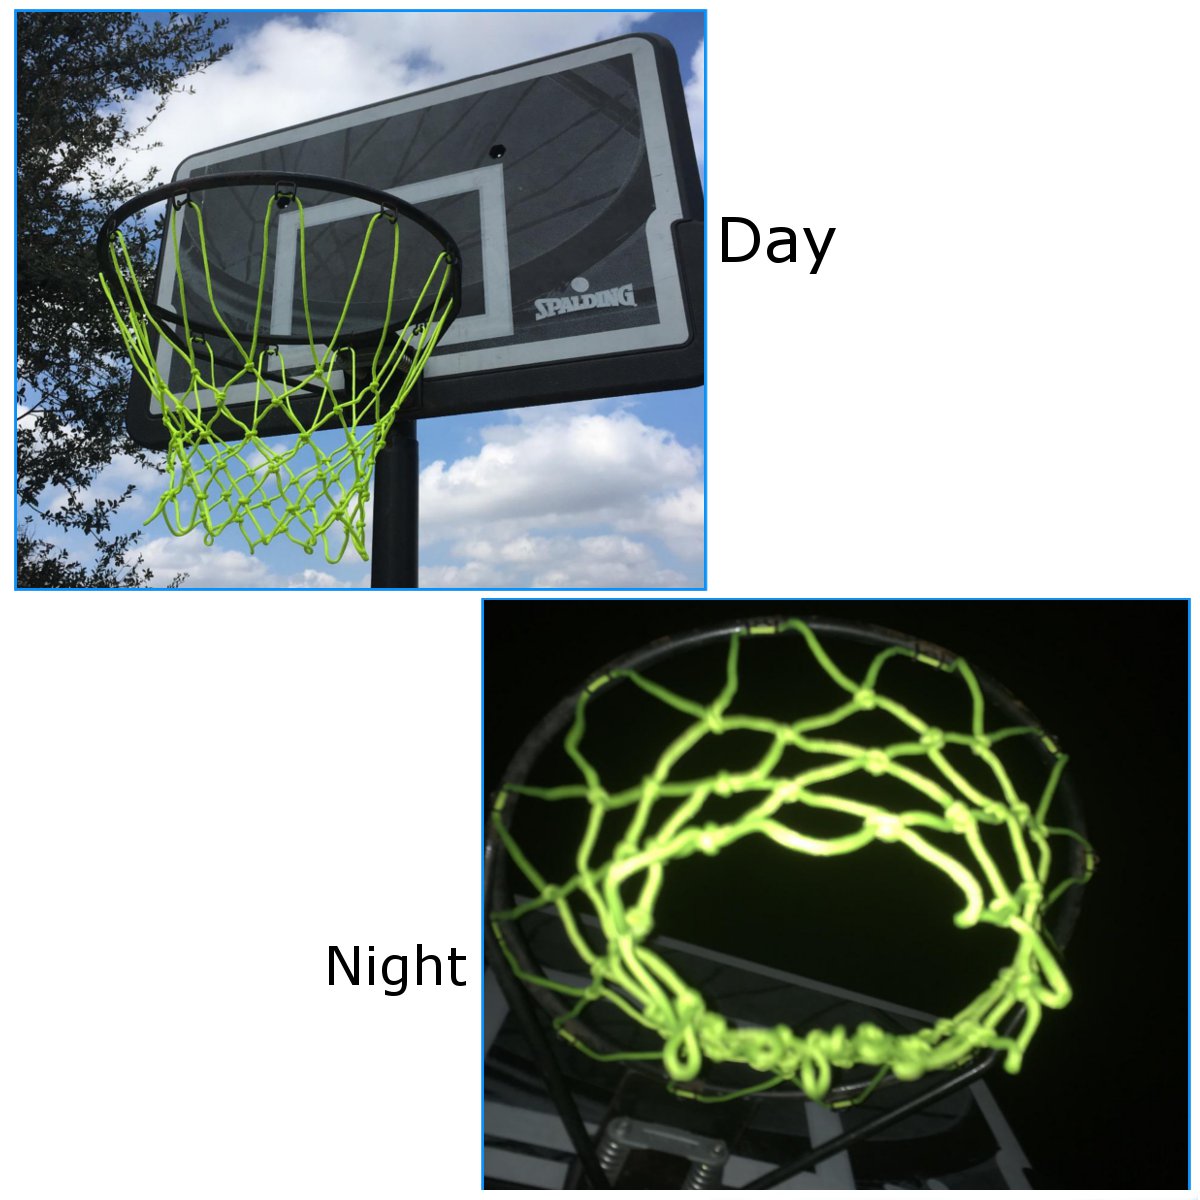 44x32cm-Glow-In-The-Dark-Basketball-Net-Nylon-Abrasion-Resistant-Easy-to-Install-Outdoor-Indoor-Bask-1884146-2